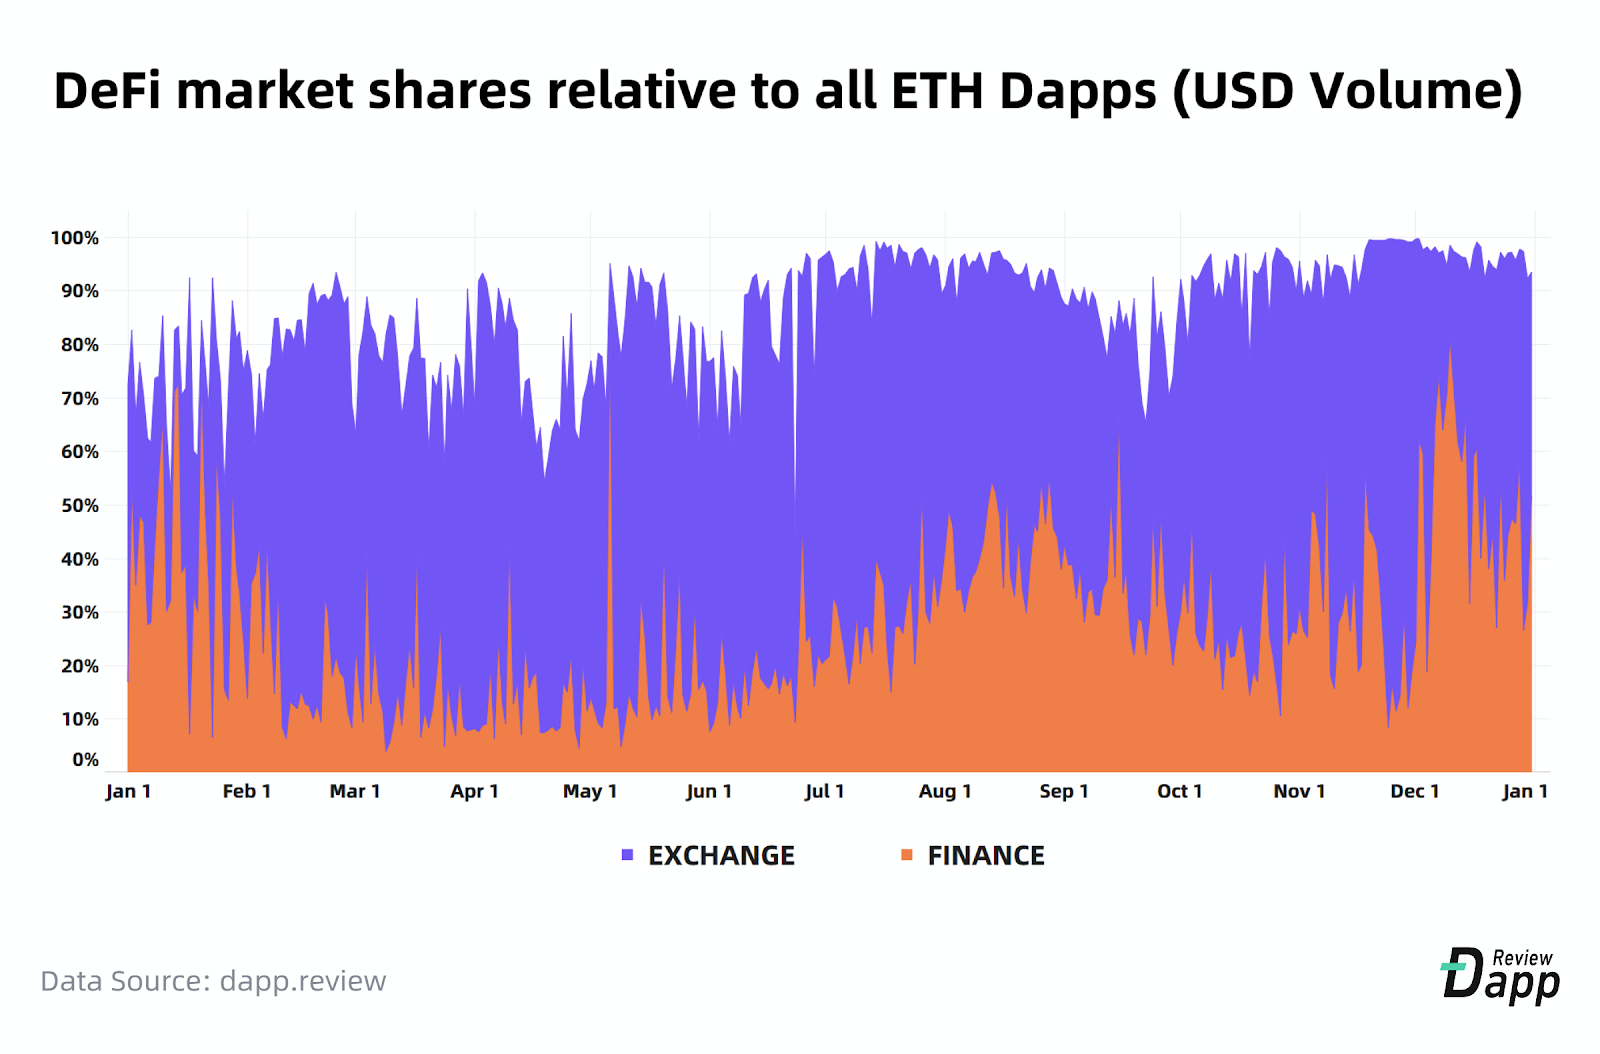 DeFi market shares relative to all ETH Dapps